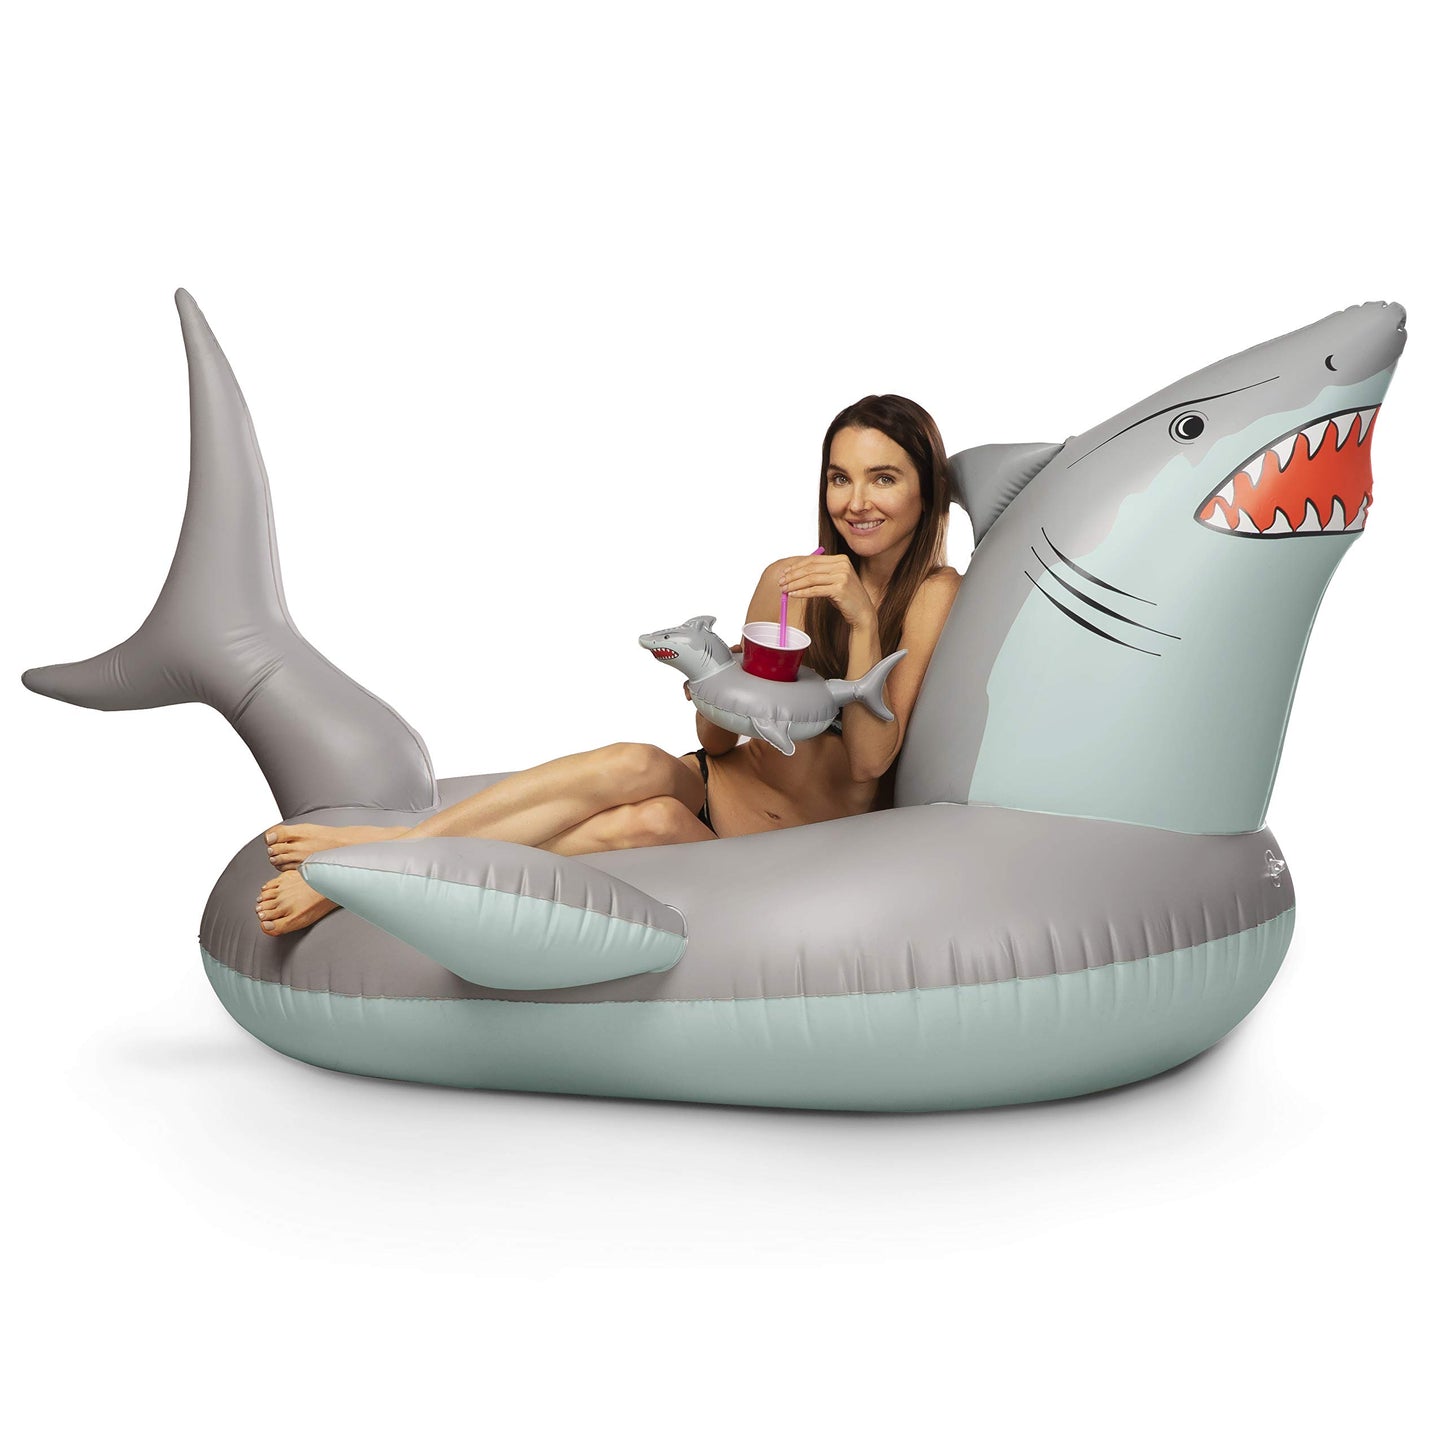 GoFloats 'Great White Bite' Shark Pool Float Party Tube - Inflatable Rafts, Adults & Kids Giant Raft